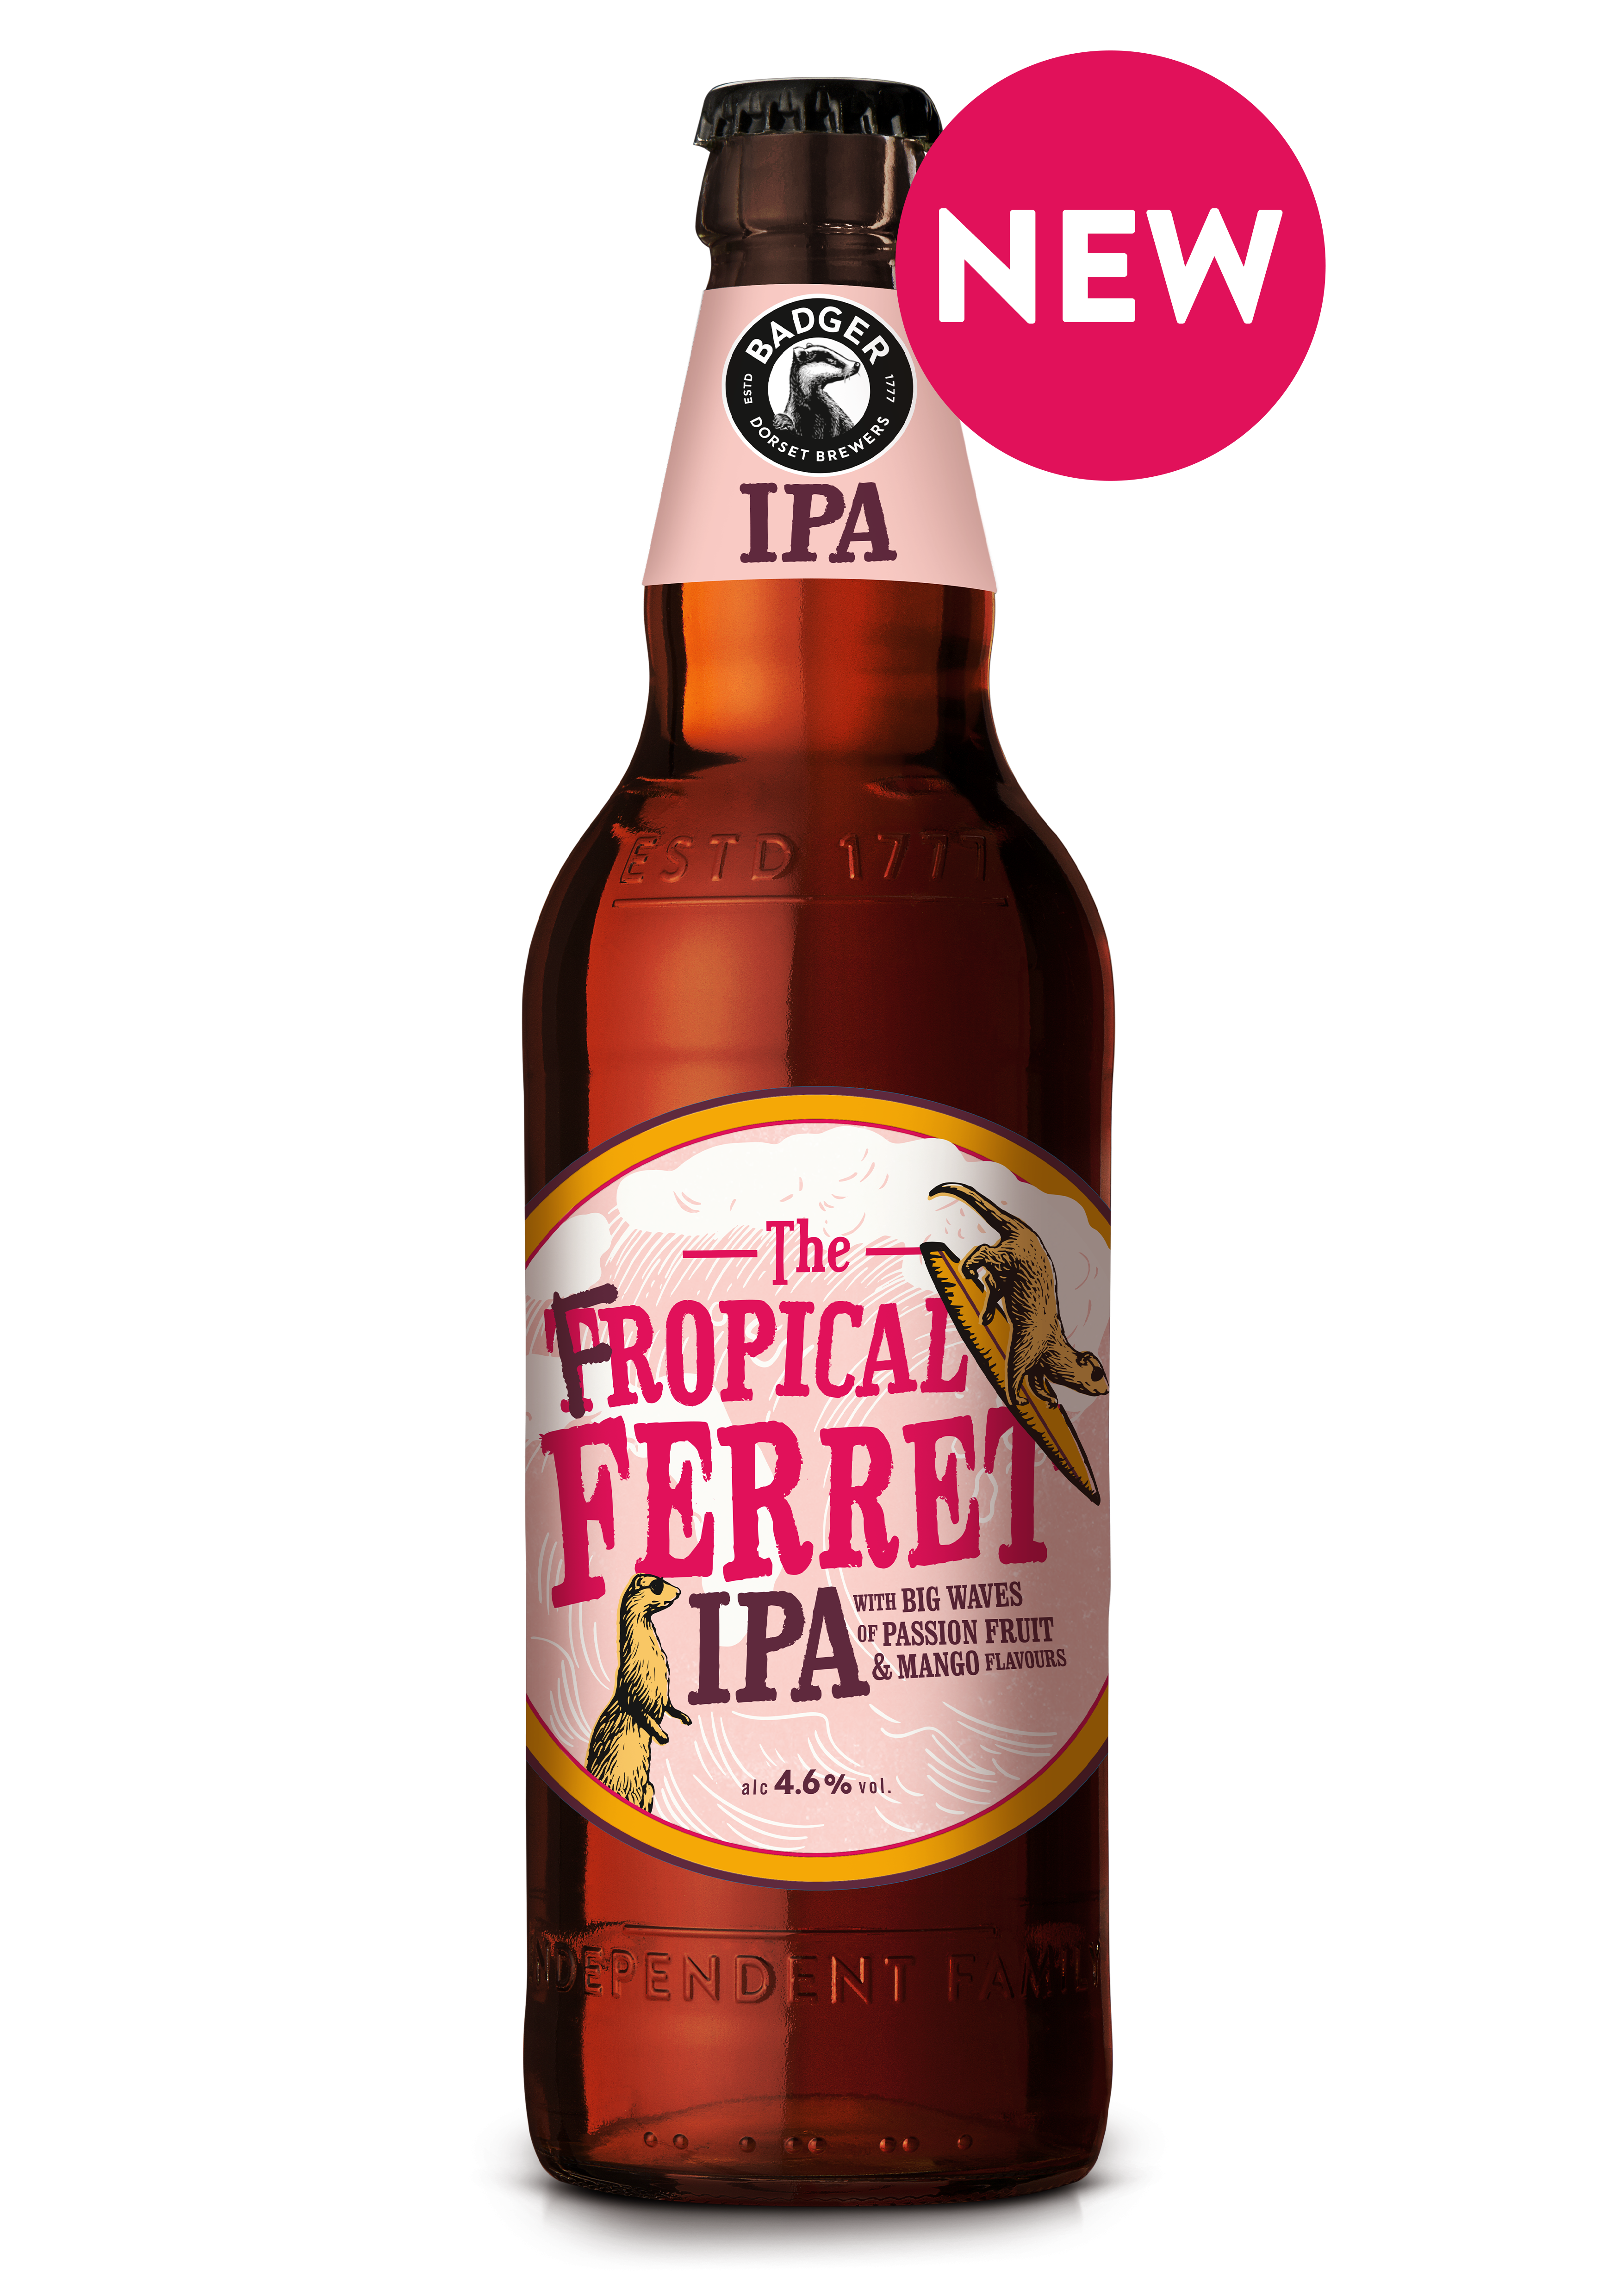 The Fropical Ferret Bottle